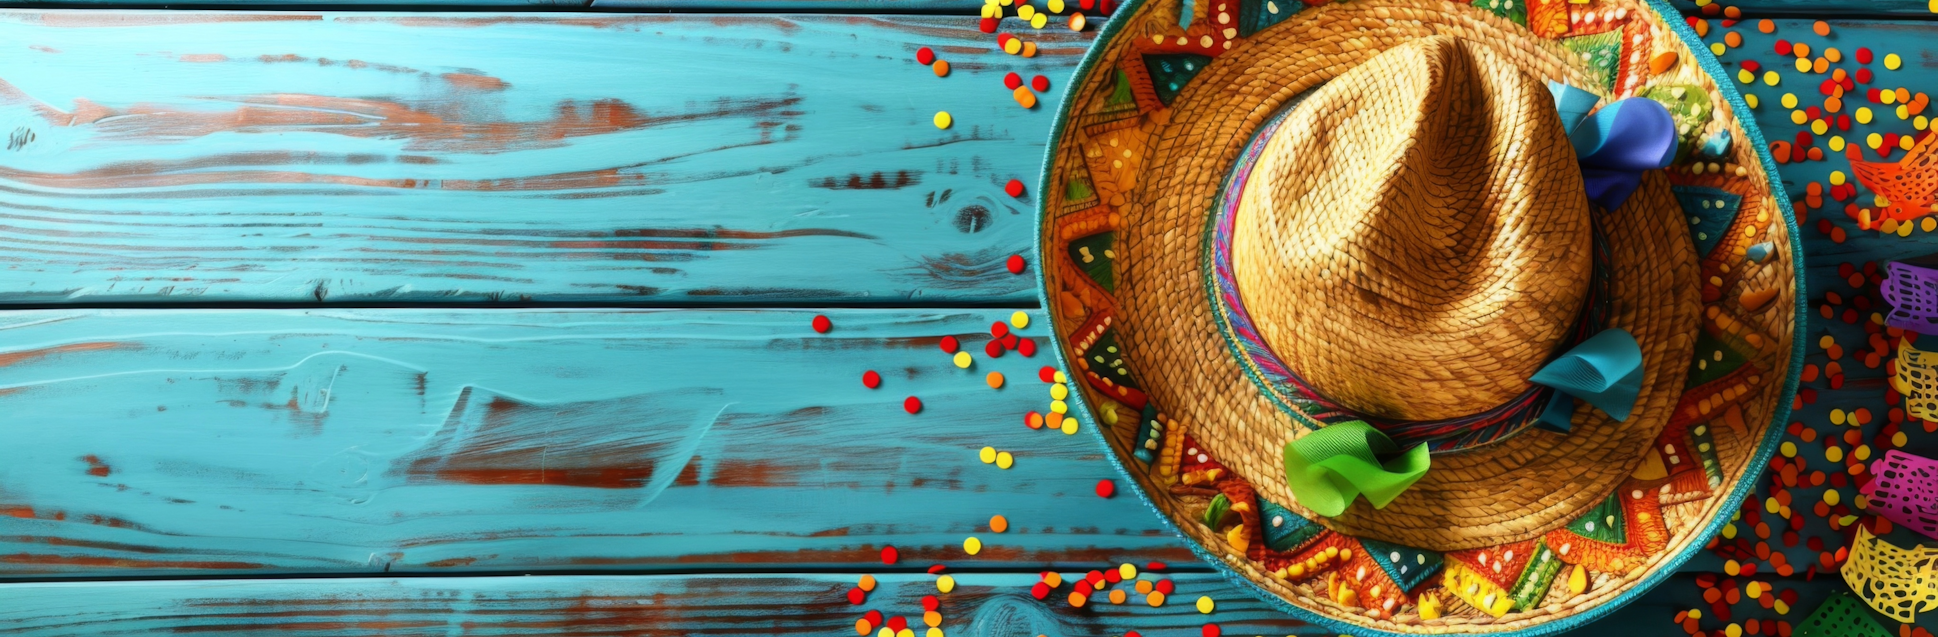 Mexican sombrero on a blue wood background with confetti